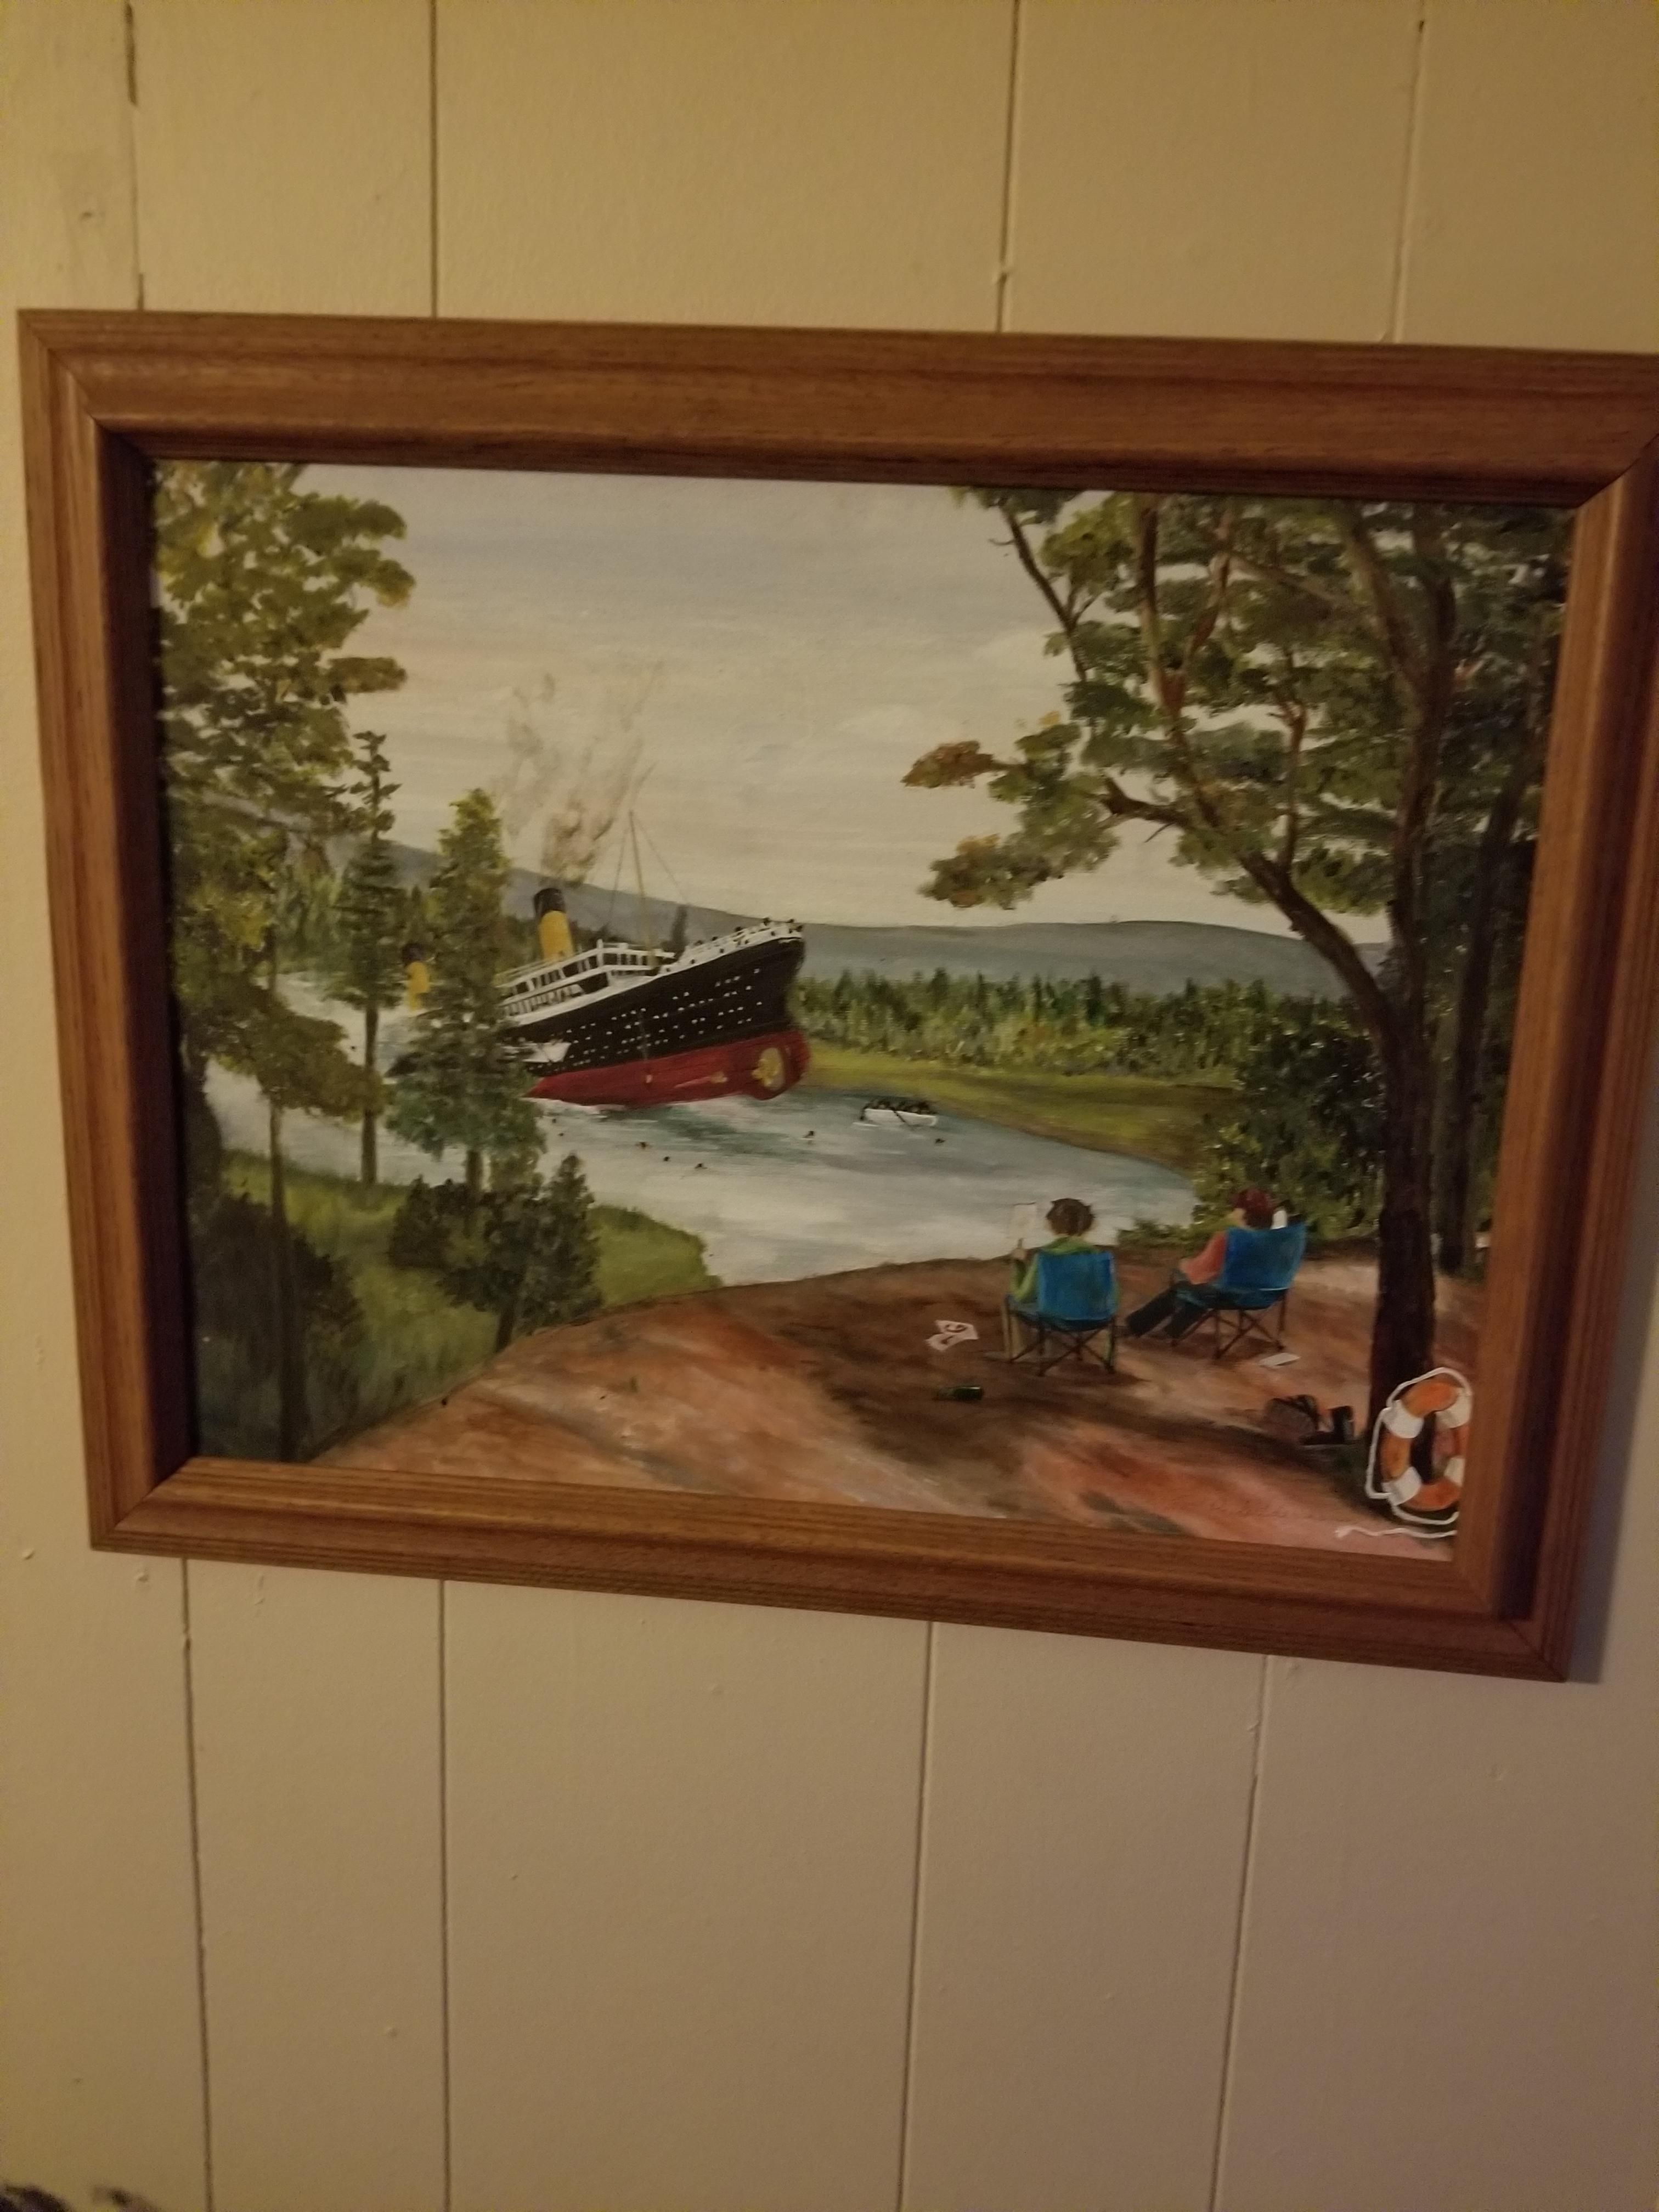 My sister likes to take Thrift store paintings and add more to them. This one is one of my favorites.